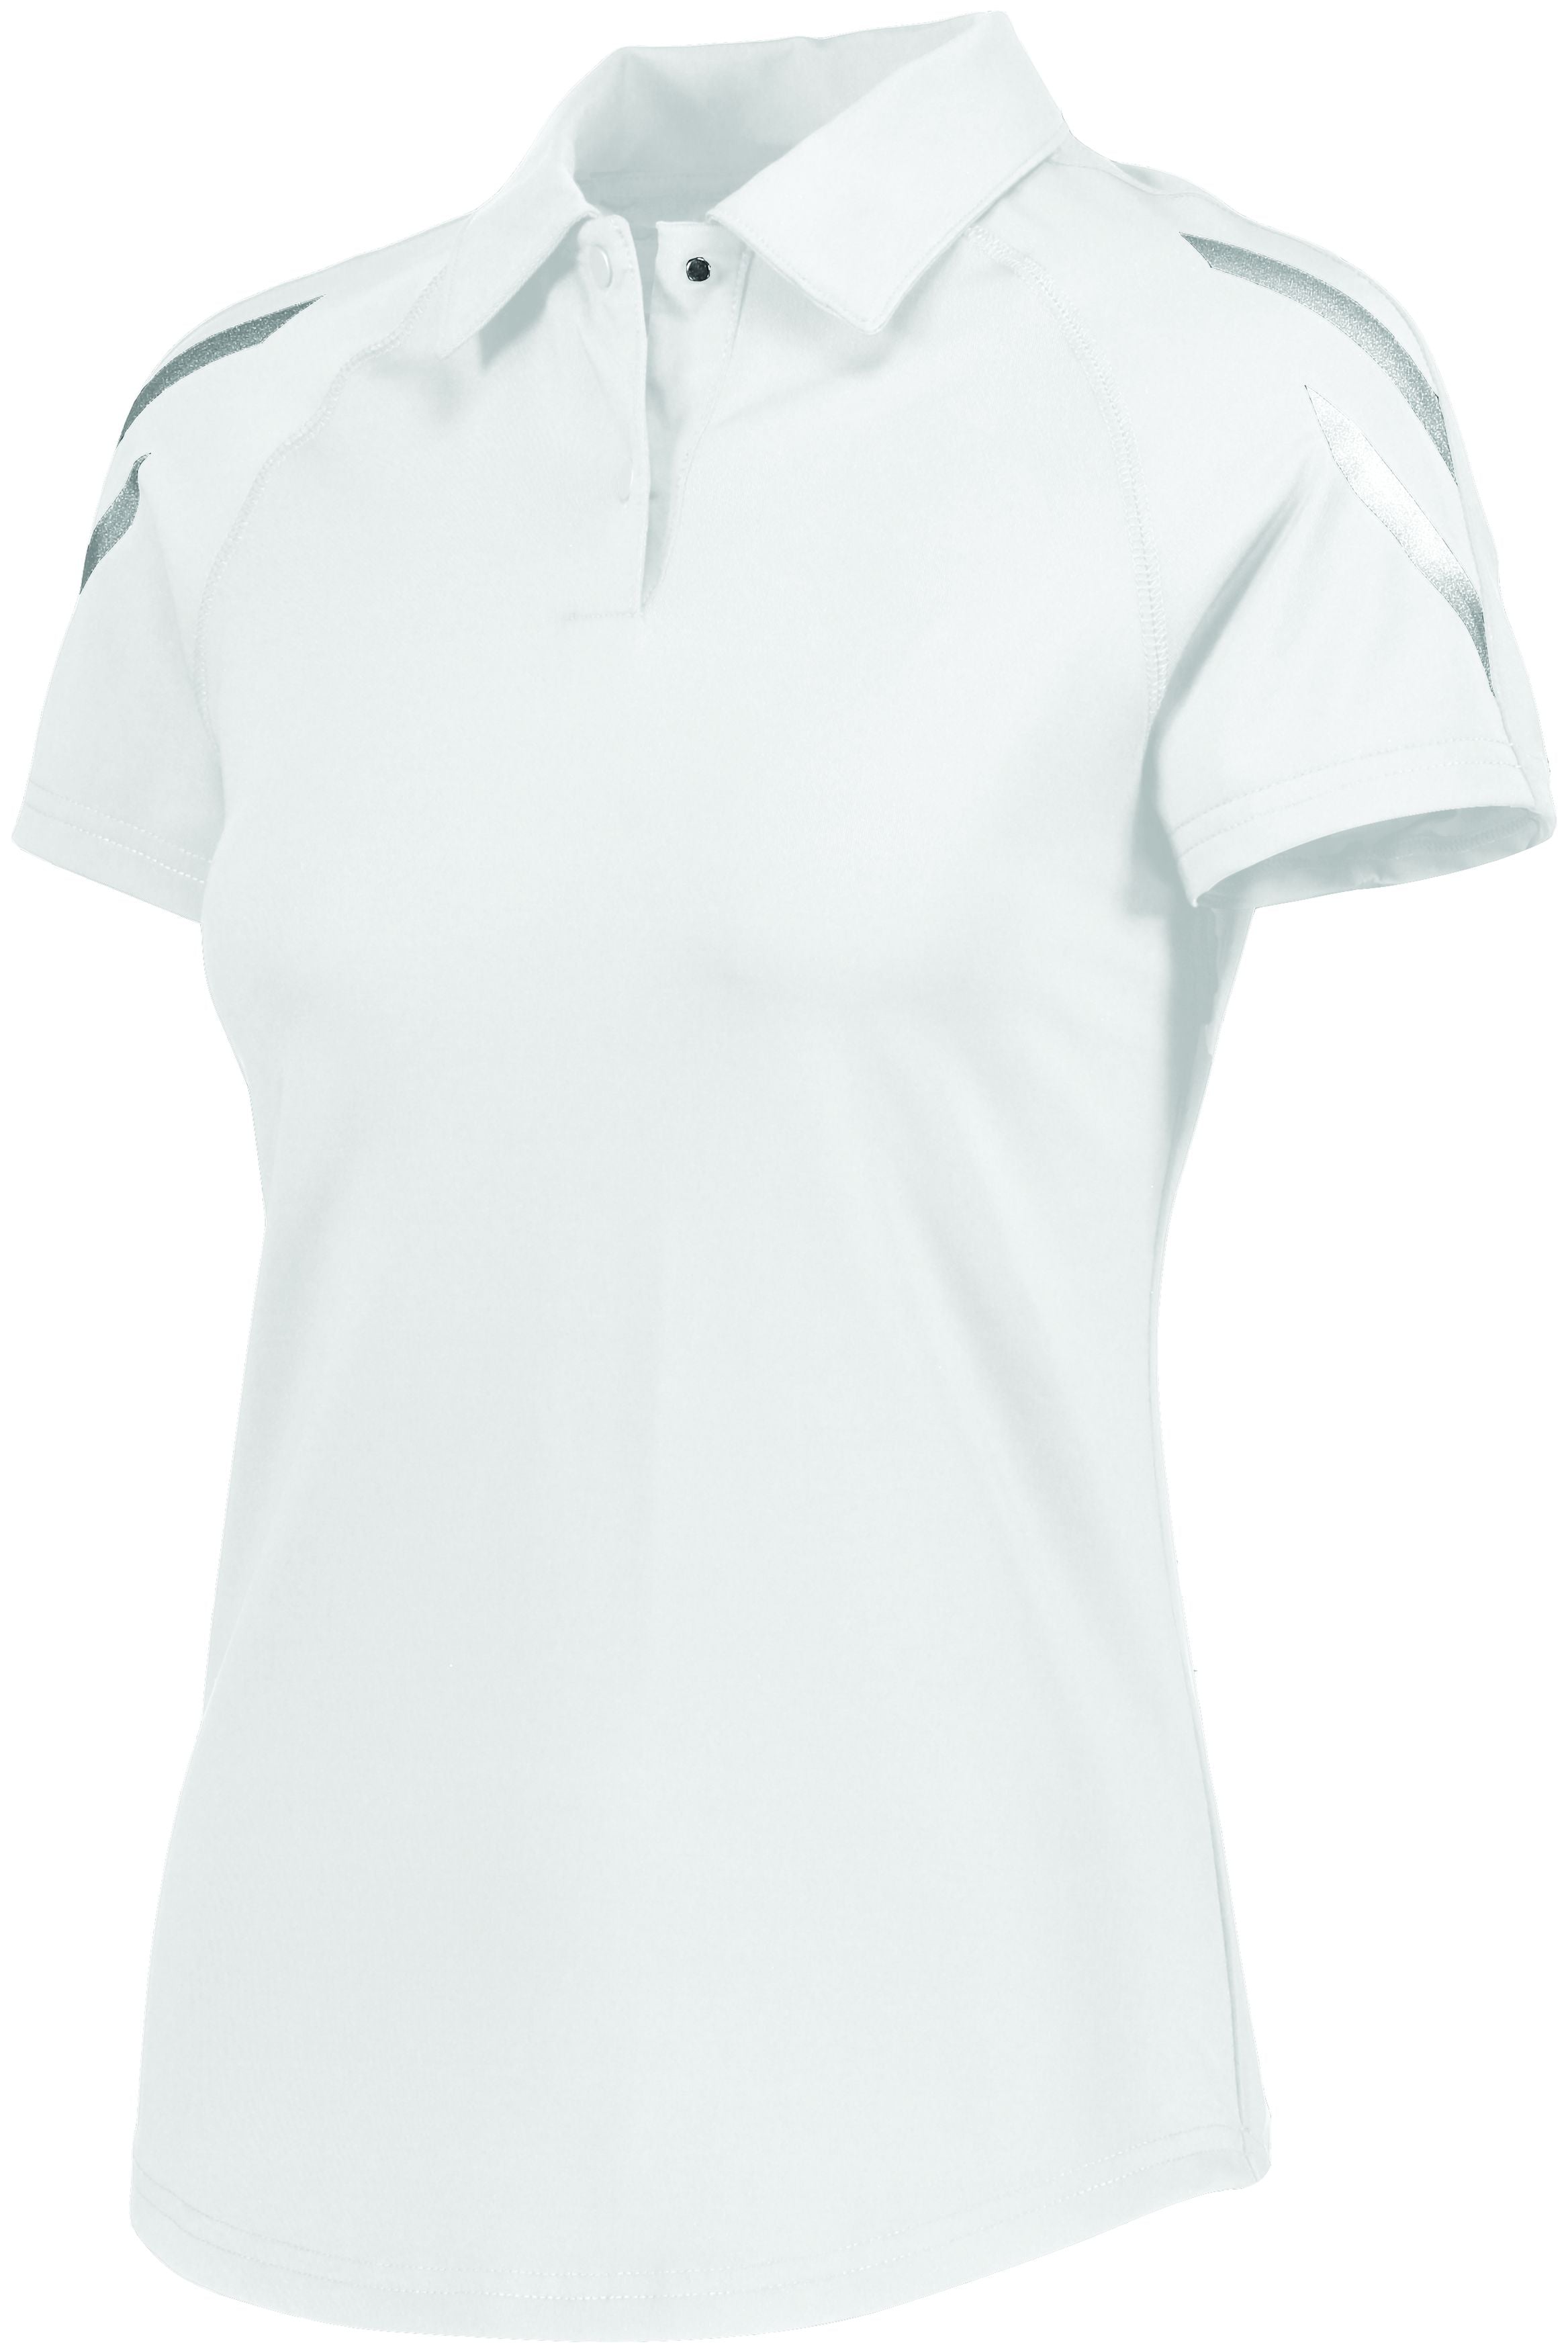 Holloway Ladies Flux Polo in White  -Part of the Ladies, Ladies-Polo, Polos, Holloway, Shirts, Flux-Collection, Corporate-Collection product lines at KanaleyCreations.com